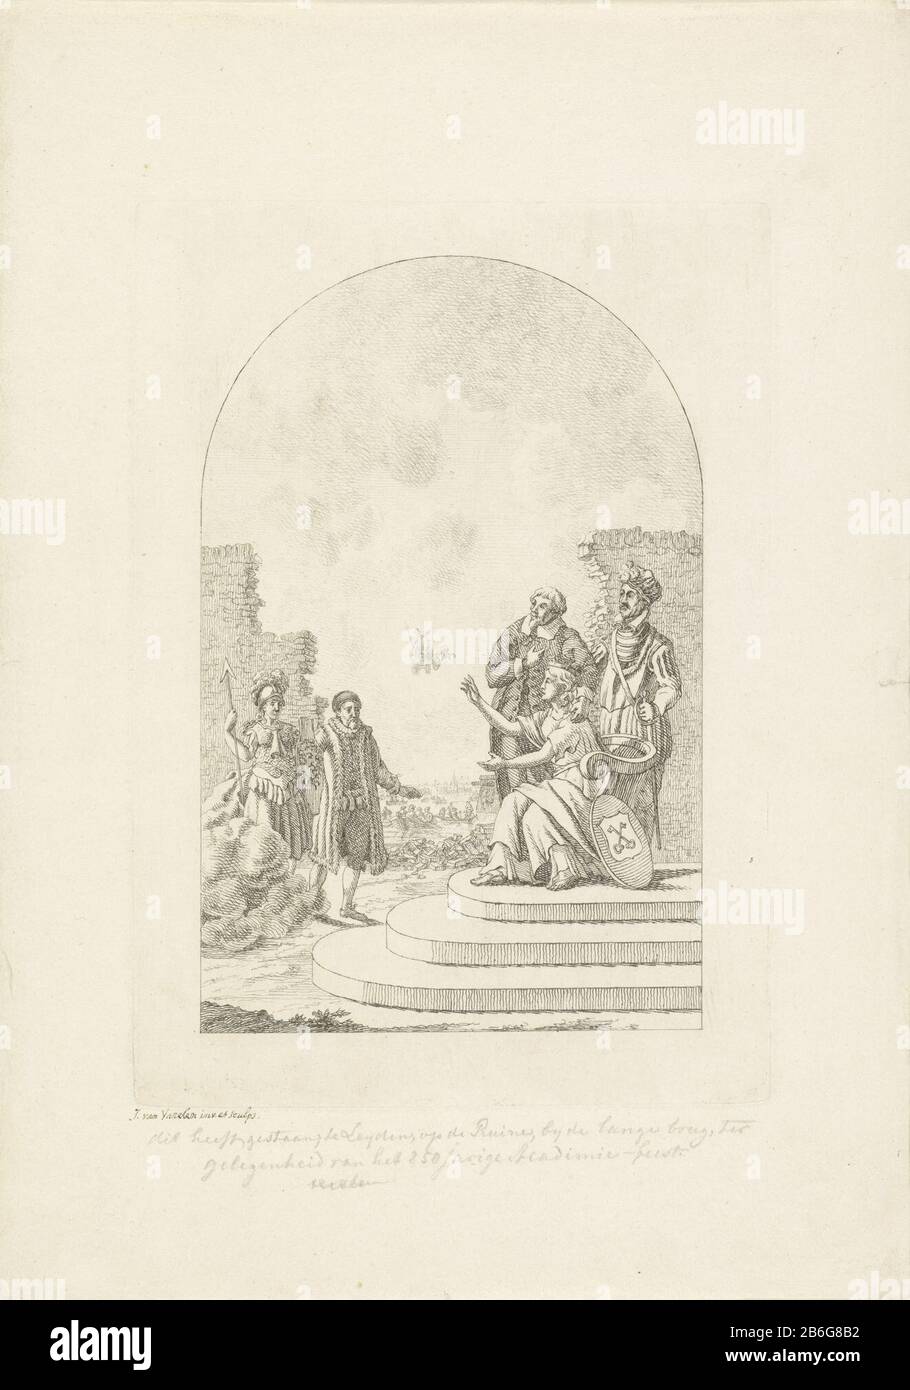 Chassinet with William of Orange and Minerva for the Leiden city maiden, at the 250-year-old Academy Festival in Leiden, 1825 William of Orange and Minerva standing before the maiden cities of Leiden its throne trying to get up to greet the two. Behind her two men standing: Johan van der Does and Mayor Peter van der Werff. Against a background of a broken brick wall. The wall view of boats on the water Where: is brought along food to the city during the liberation of Leiden. Airborne Mars departs in his chariot. This performance was depicted on a chassinet prepared to ruin the Langebrug Leiden Stock Photo